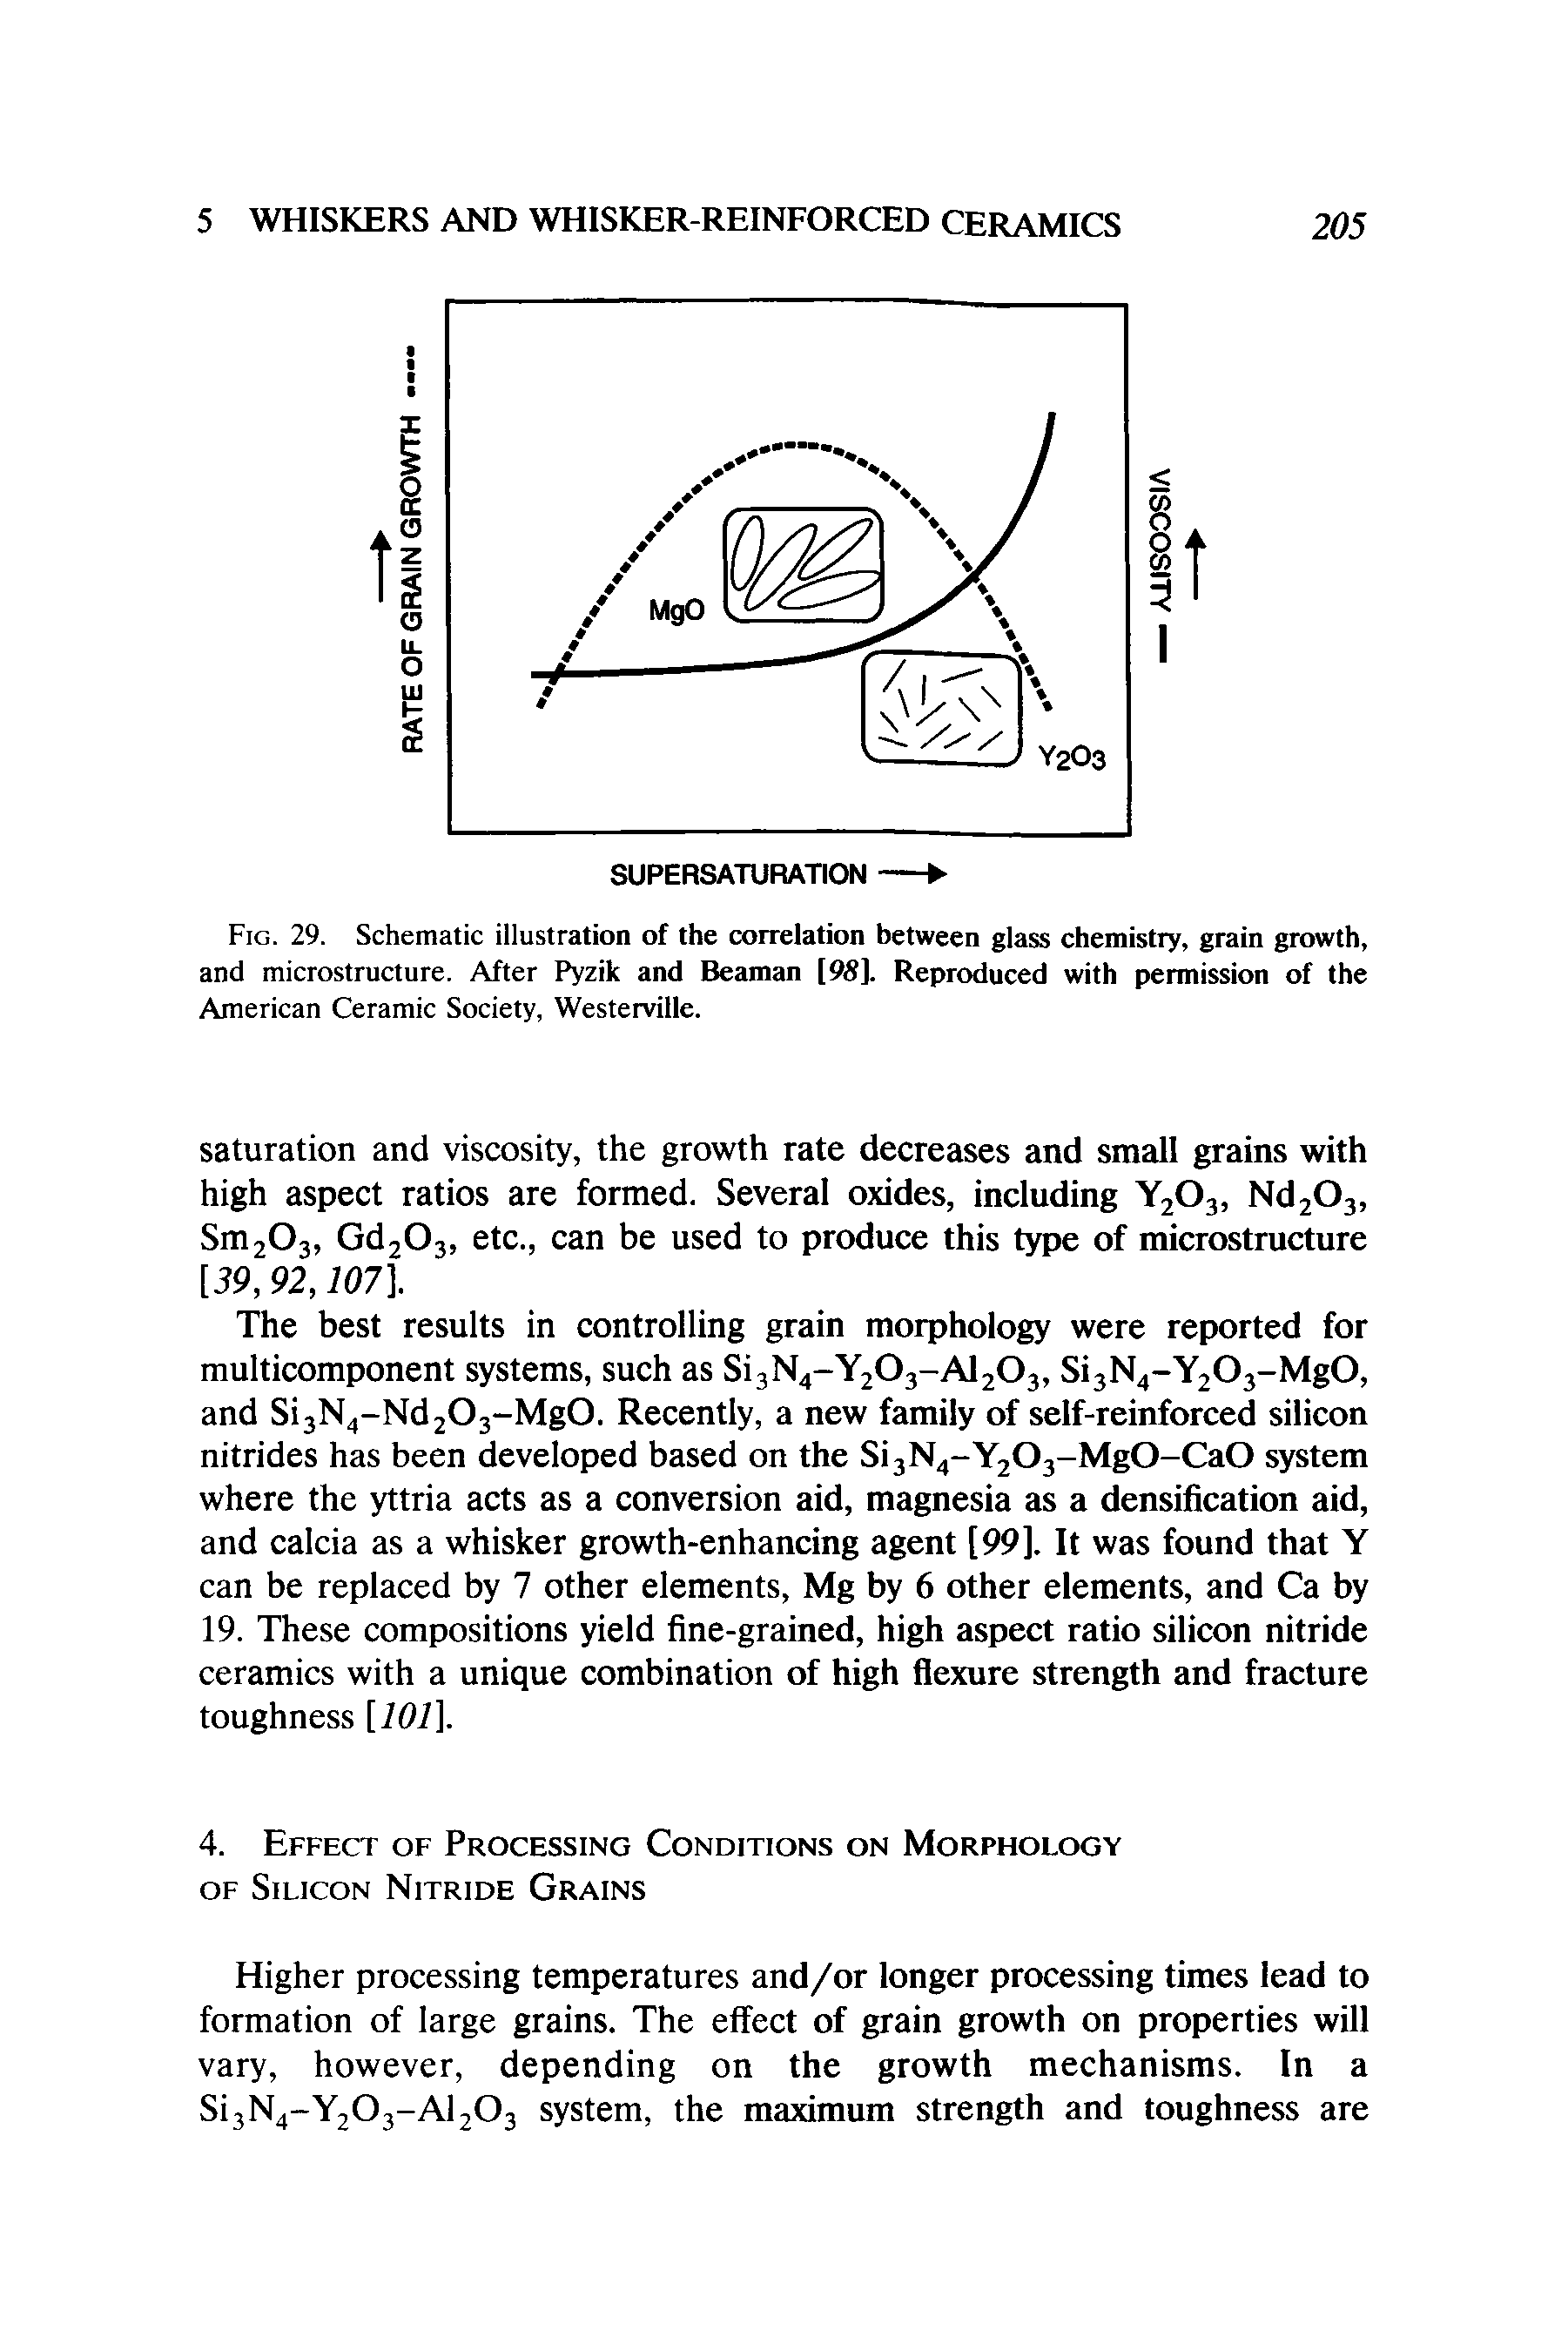 Fig. 29. Schematic illustration of the correlation between glass chemistry, grain growth, and microstructure. After Pyzik and Beaman [98], Reproduced with permission of the...